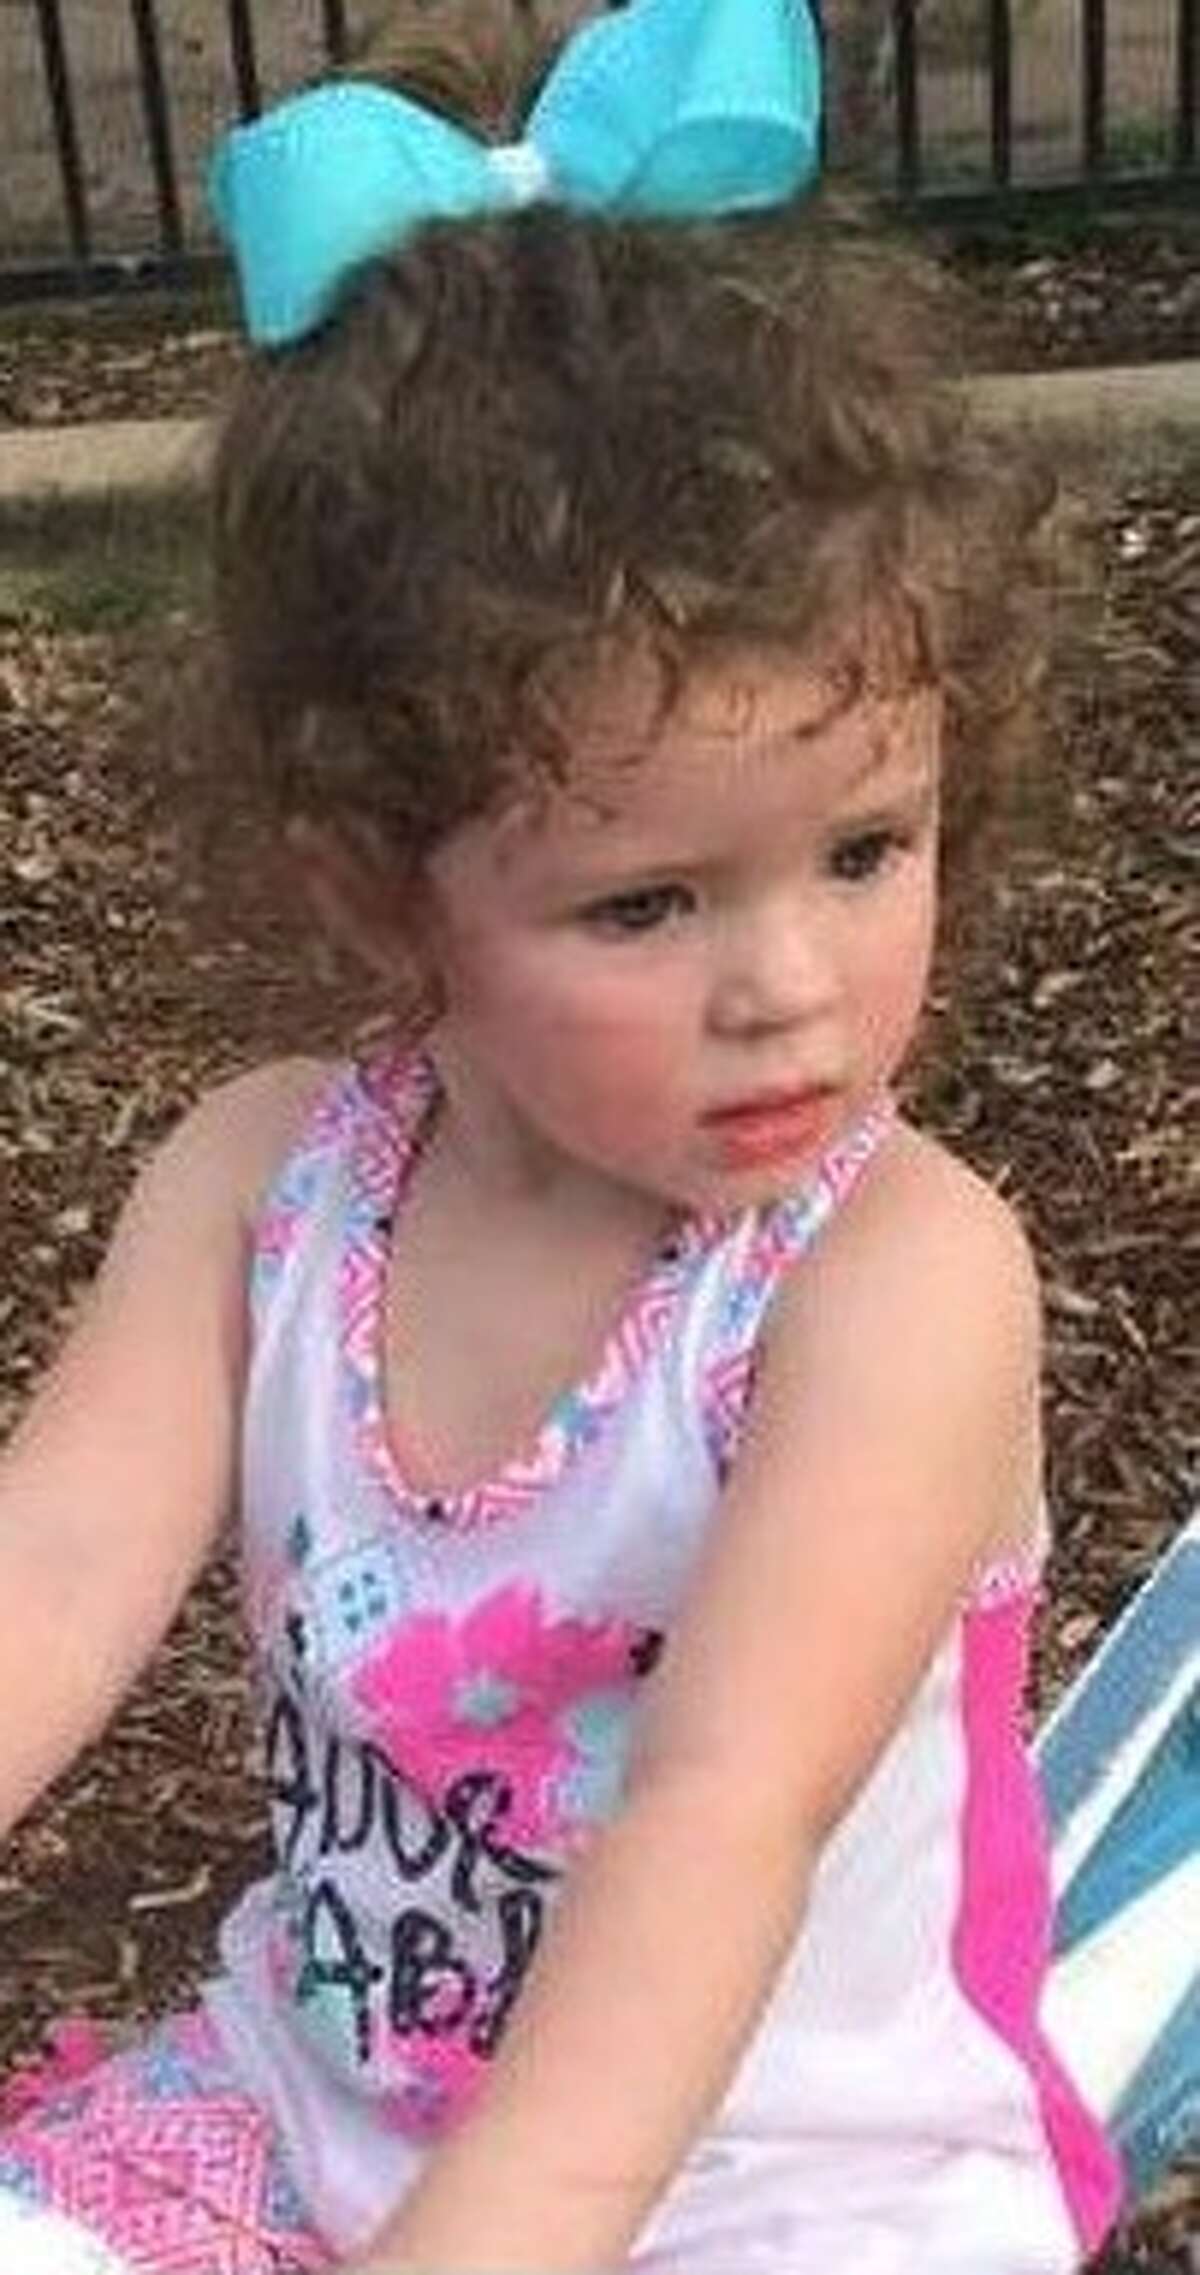 Police Searching For 2 Year Old Girl From Galena Park